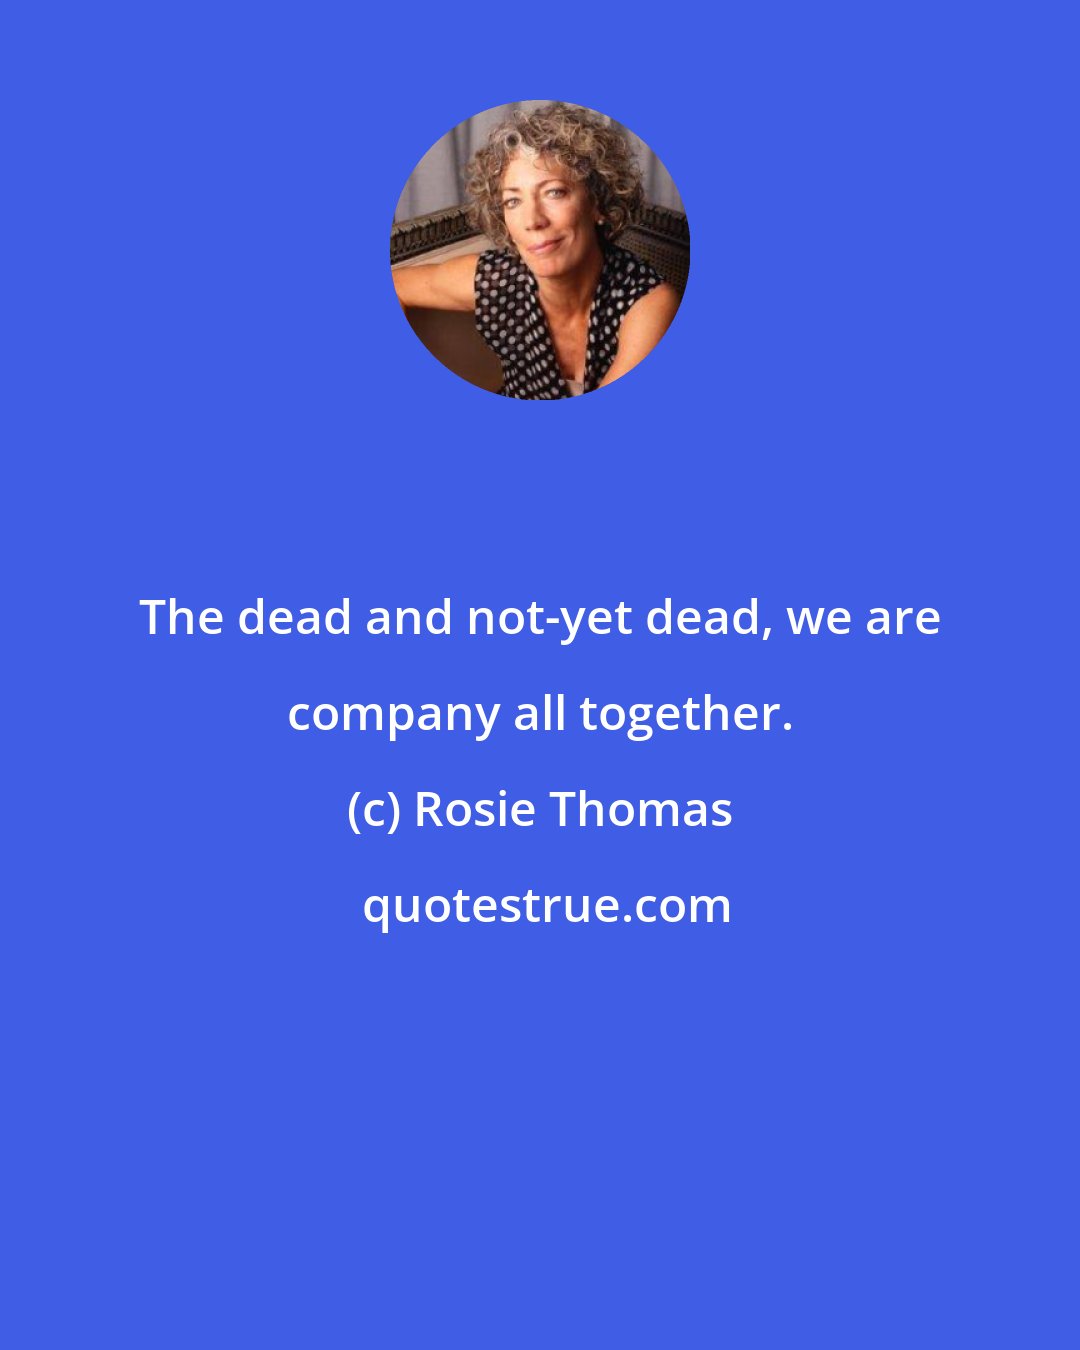 Rosie Thomas: The dead and not-yet dead, we are company all together.